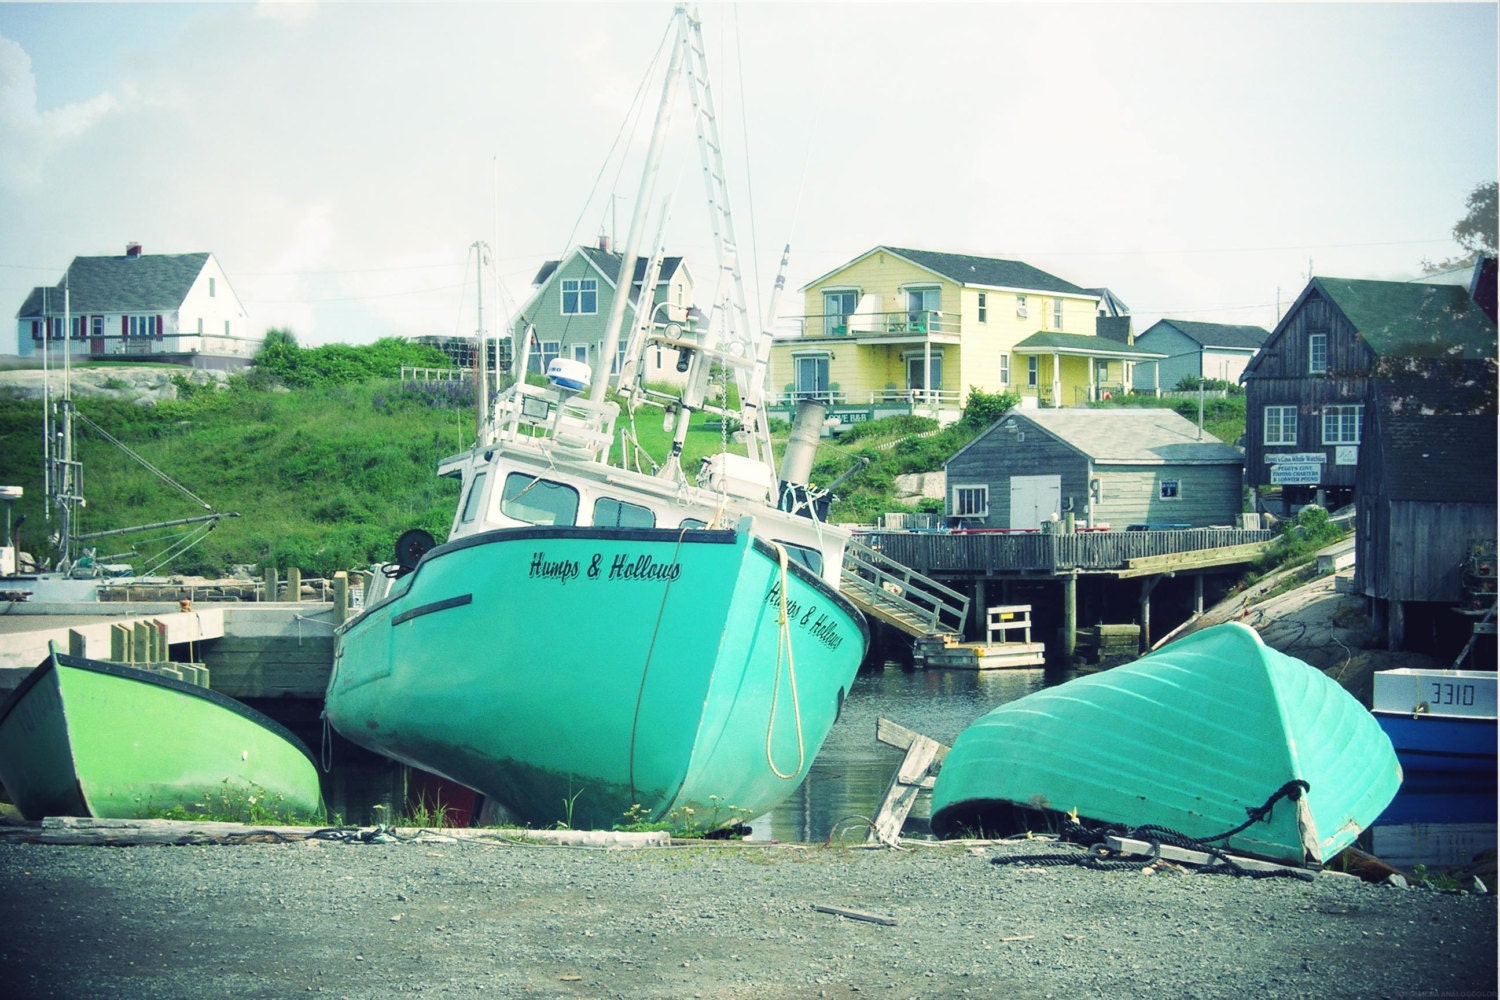 Photo Print - Turquoise Seaside Boats and Yellow Buildings - CapeCodPhoto